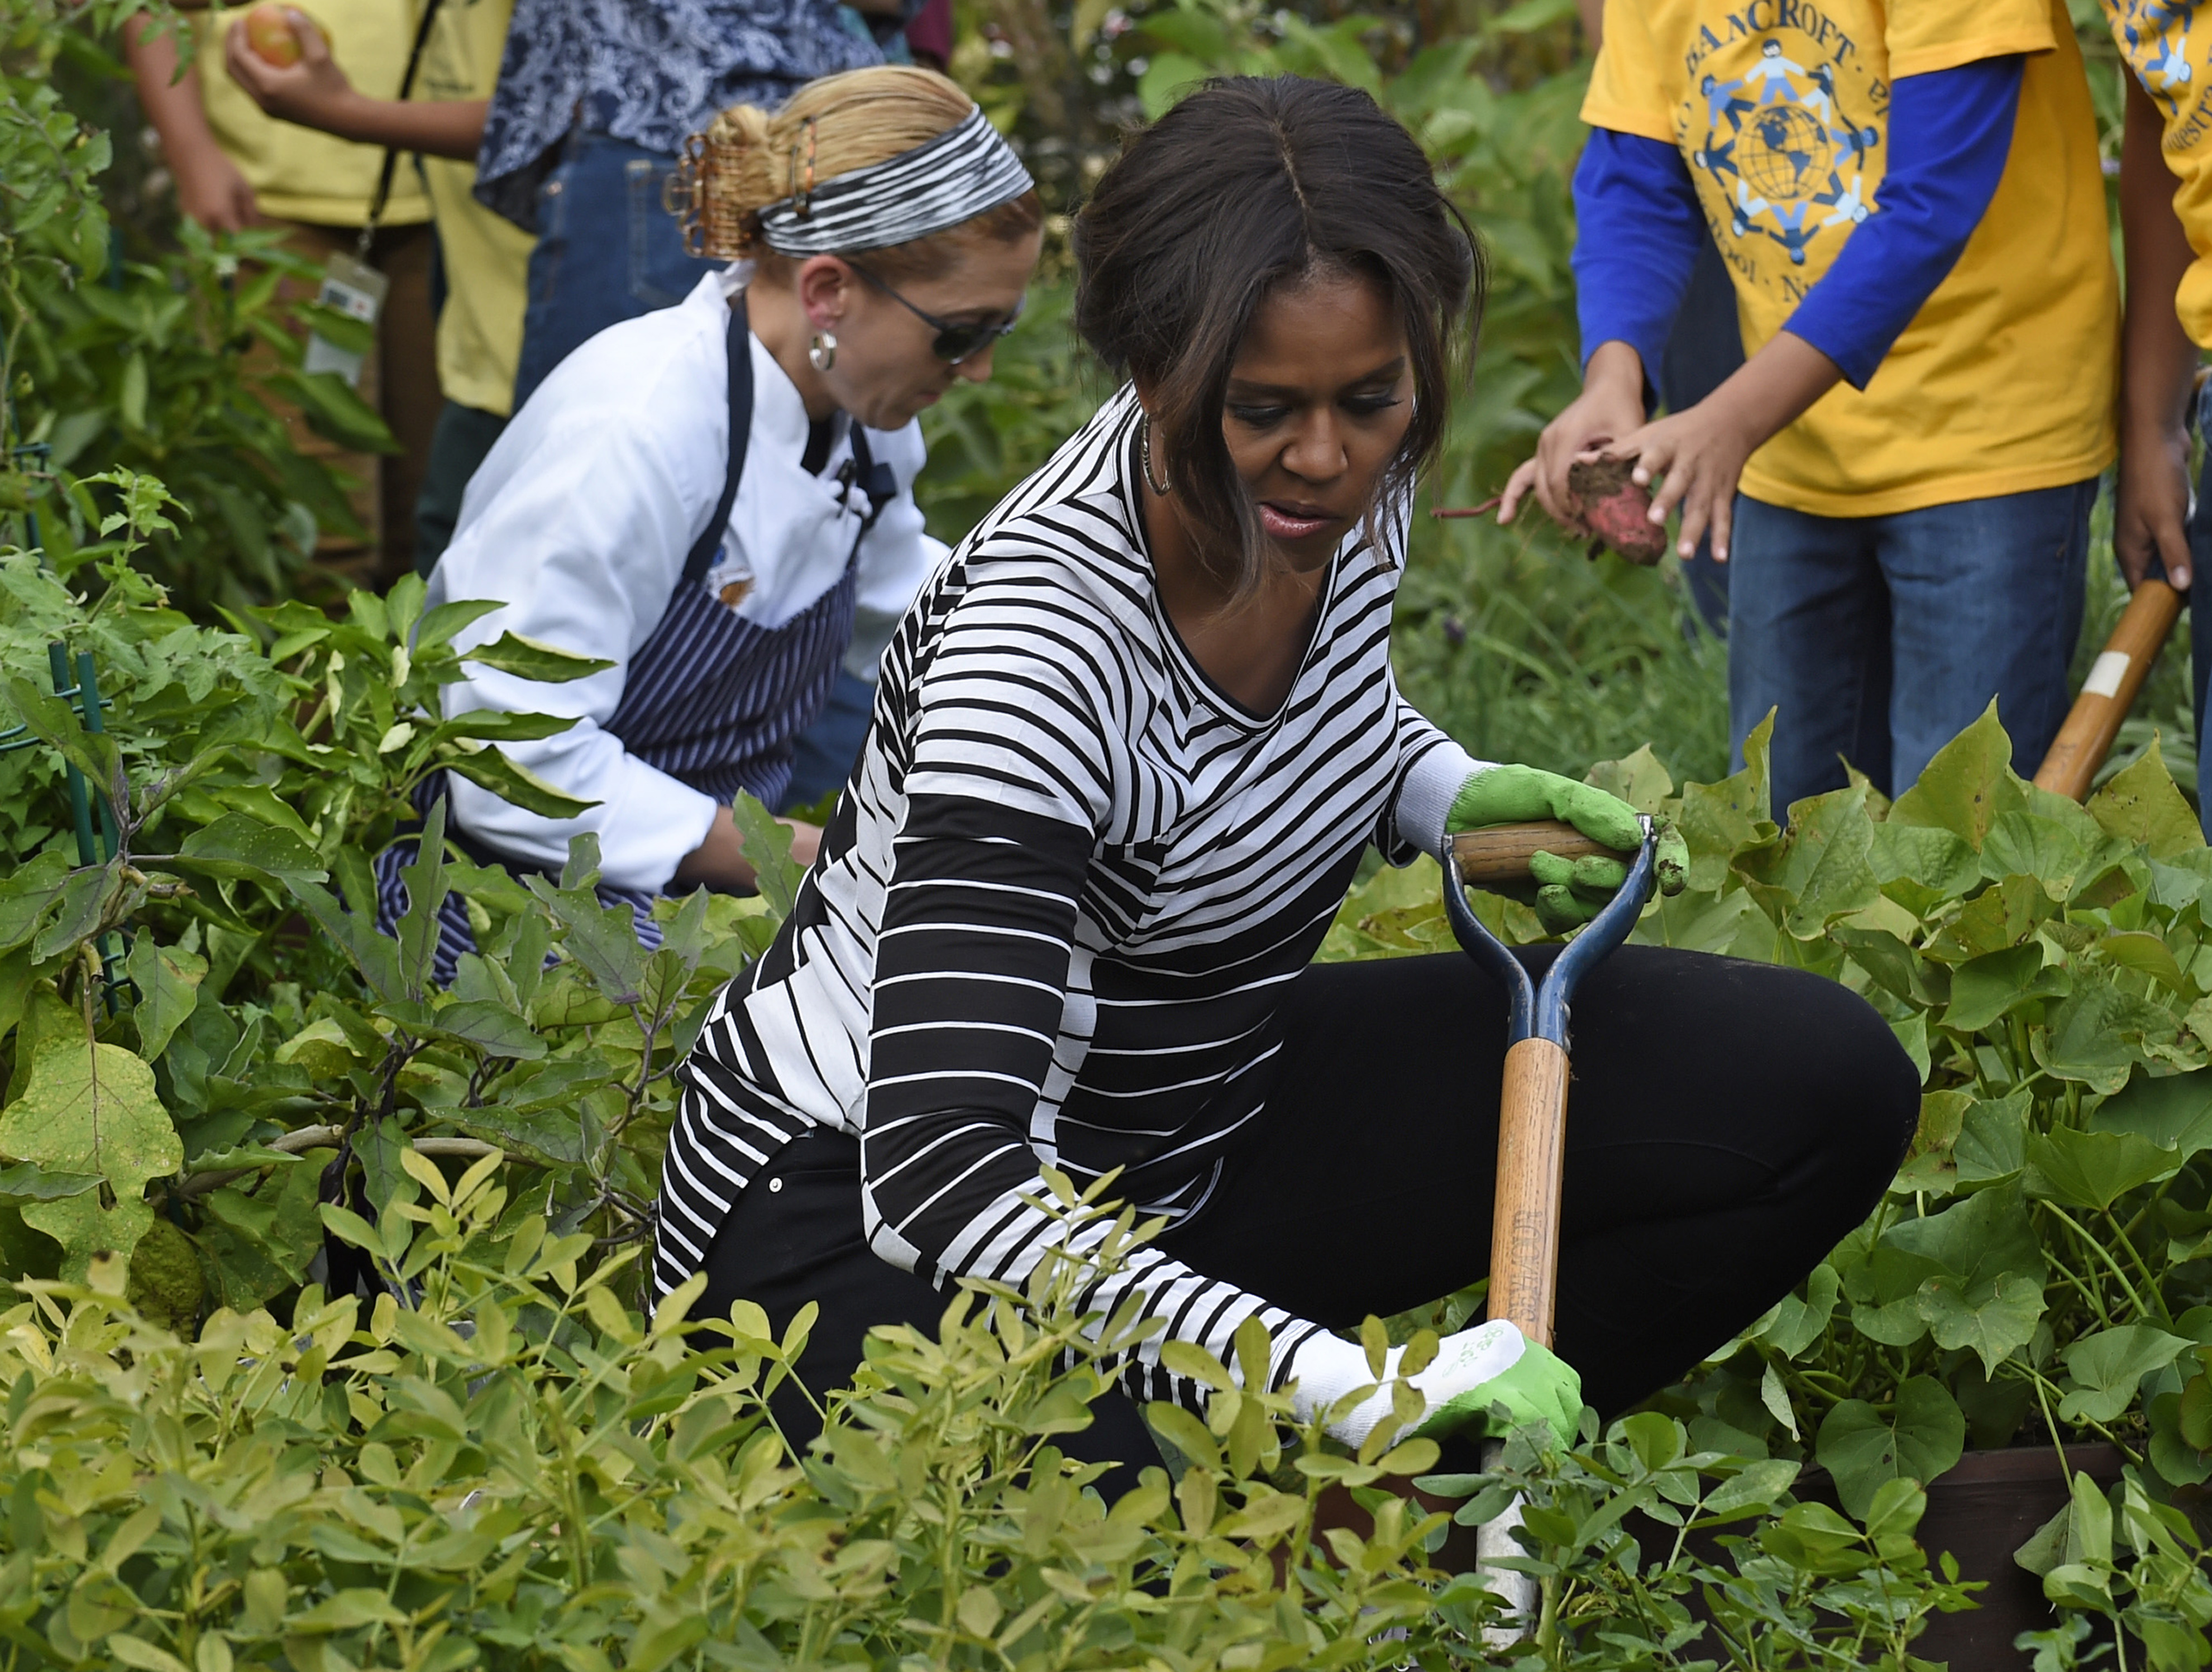 First Lady Michelle Obama is joined by school children as they harvest peanuts in the annual fall harvest at the White House on Oct. 14, 2014 (Susan Walsh—AP)